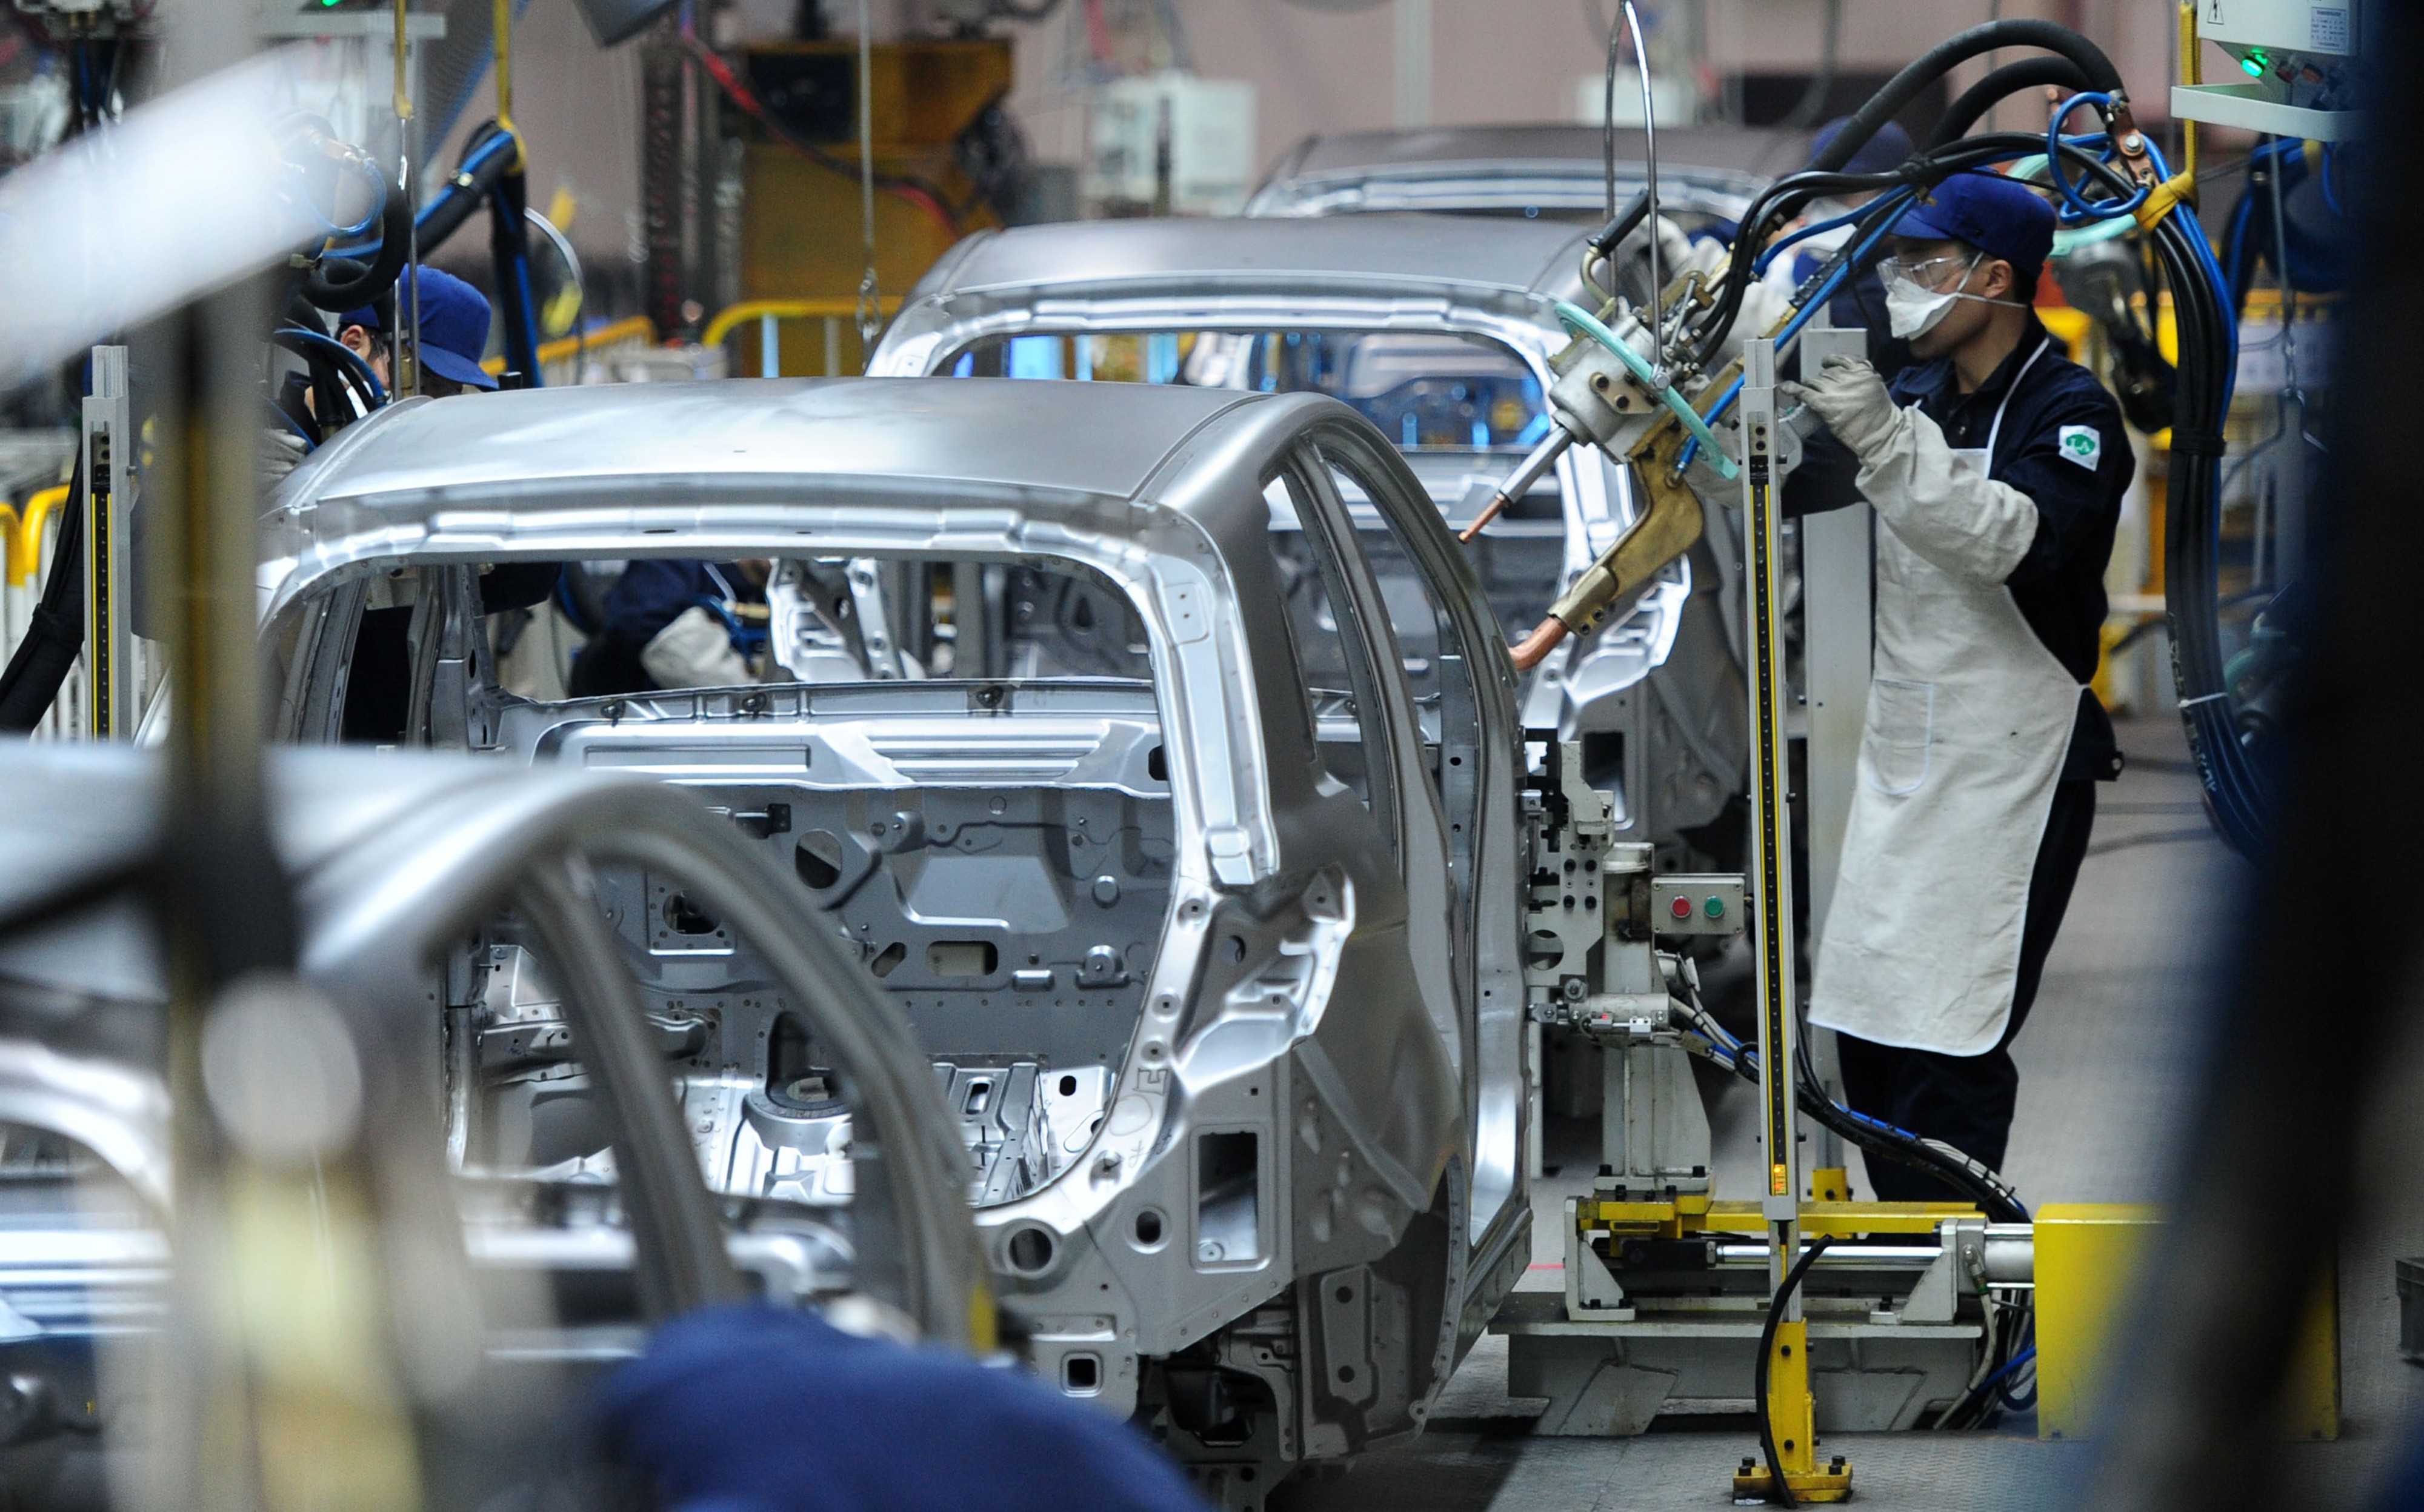 Cars are assembled at BAIC Motor’s plant in Zhuzhou, in Hunan province. On Tuesday, Beijing said it would phase out rules requiring foreign carmakers to partner with a local firm to set up a factory in China in the next five years. Photo: Imaginechina